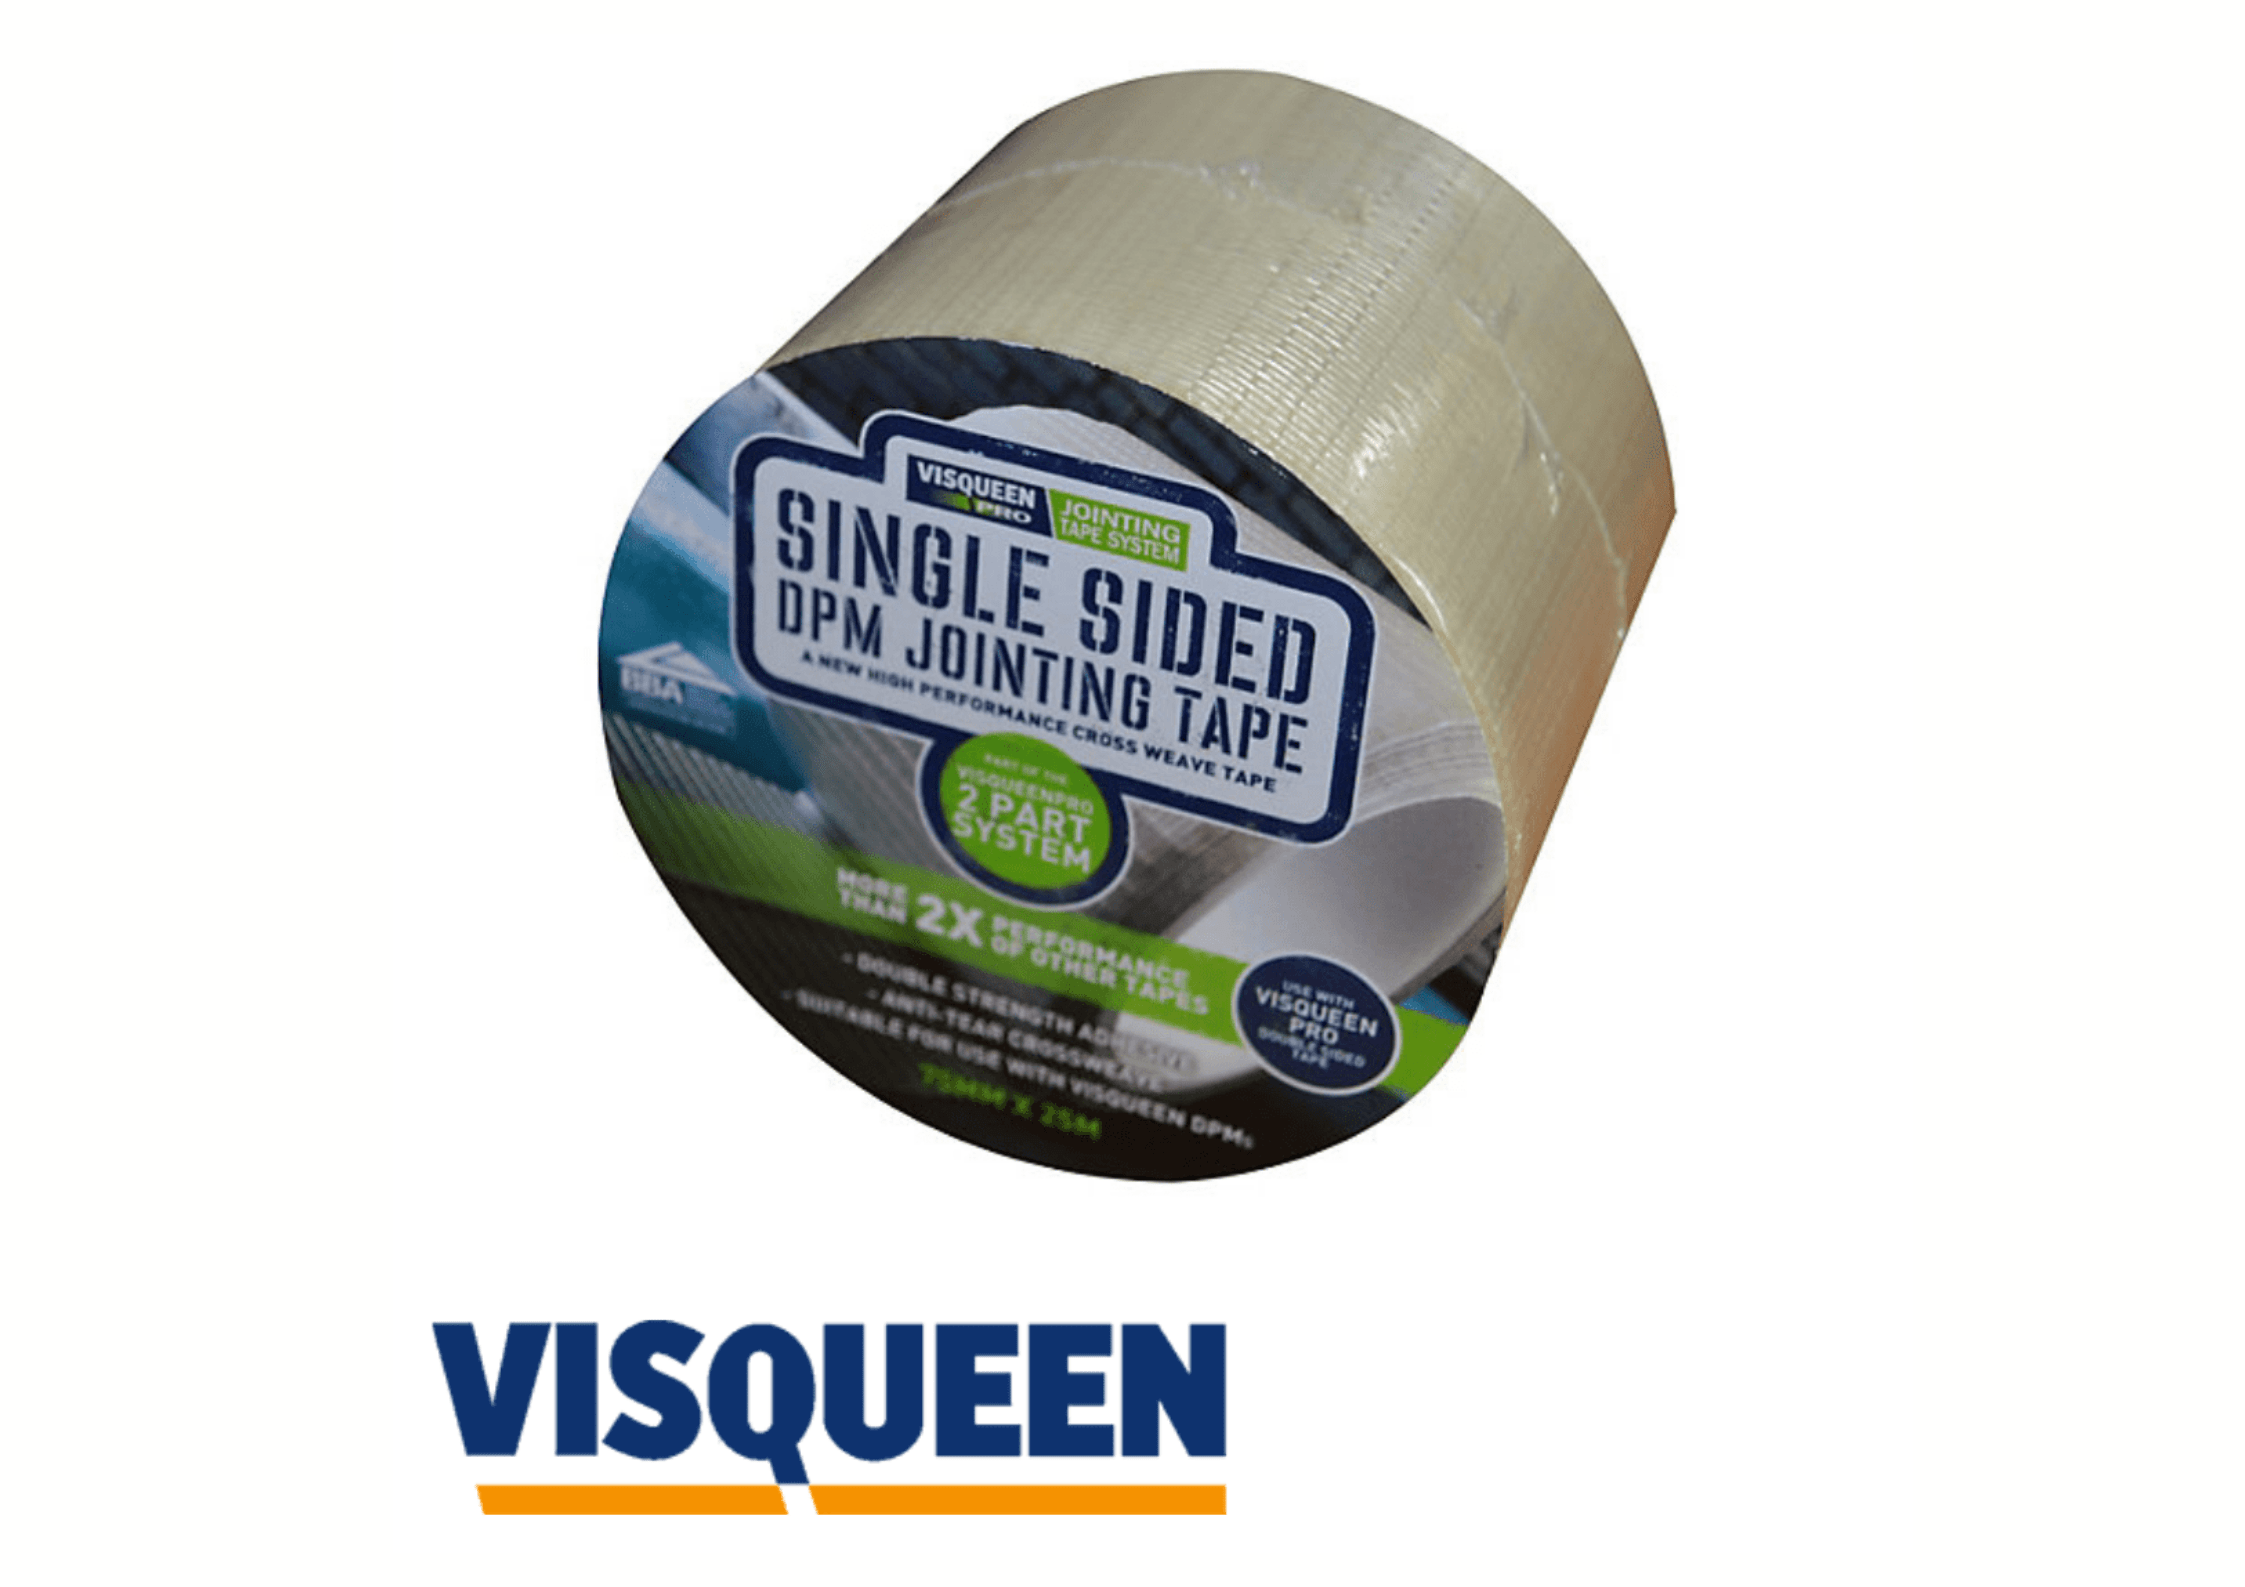 Visqueen Hardware Tape Visqueen Single Sided Jointing Tape 75mm x 25m